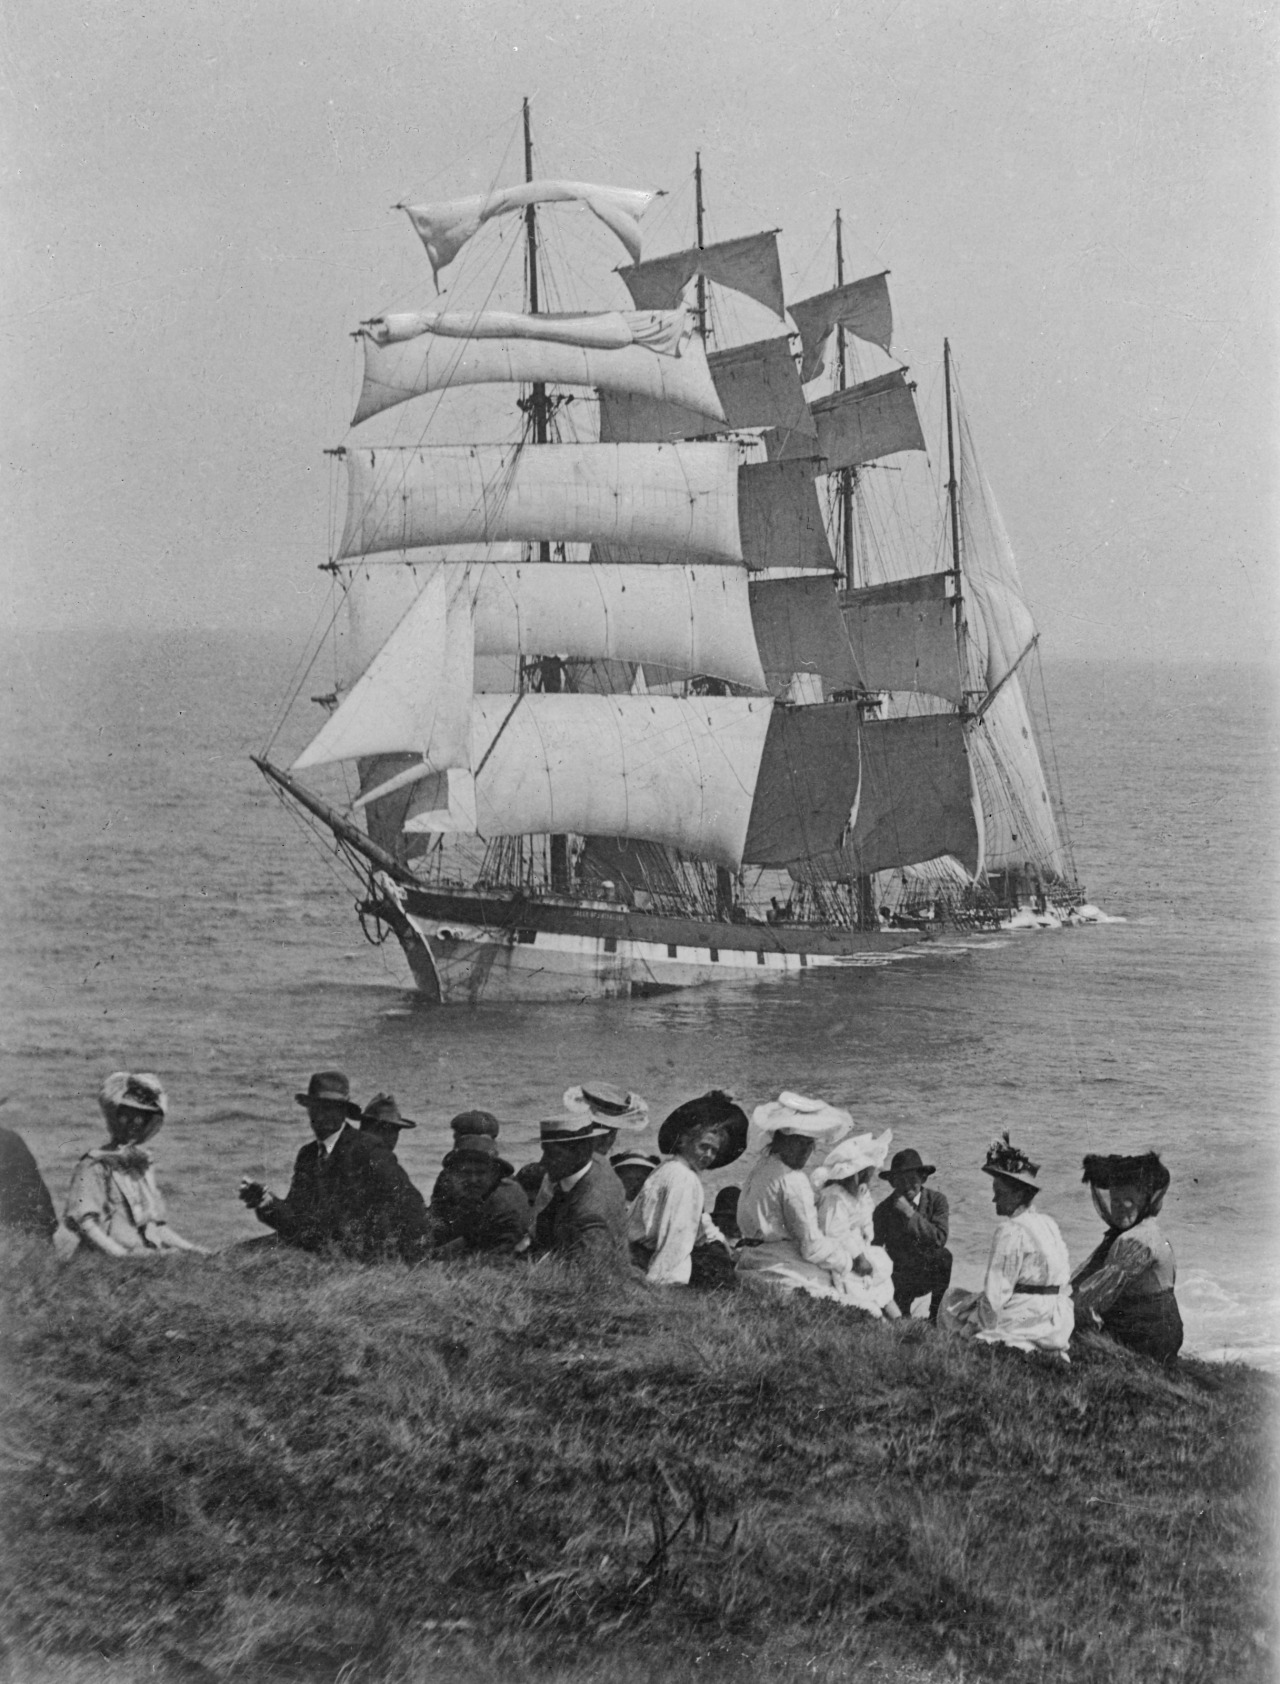 fyeah-history:
“The Falls of Halladale, aground near Peterborough, Victoria, Australia. 1886
The Falls of Halladale was a four-masted iron-hulled barque that was built in 1886 for the long-distance bulk carrier trade. Her dimensions were 83.87m x...